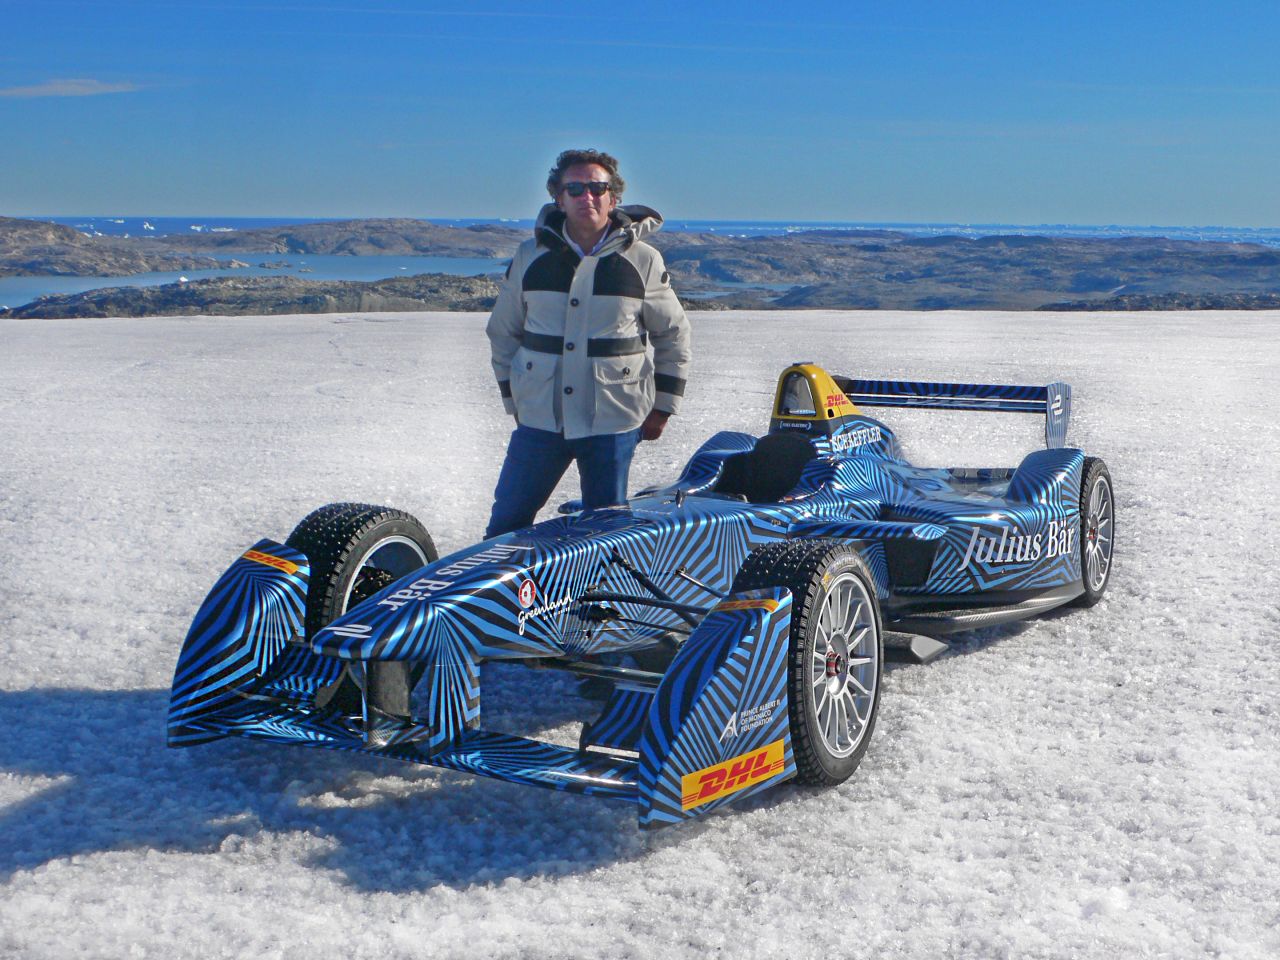 E1 is the brainchild of serial sports entrepreneur Alejandro Agag, who having launched Formula E and its off-road counterpart Extreme E, is now turning to the water. Pictured, Agag with the all-electric first generation Formula E car on an ice cap near Nuuk, Greenland, in September 2016.